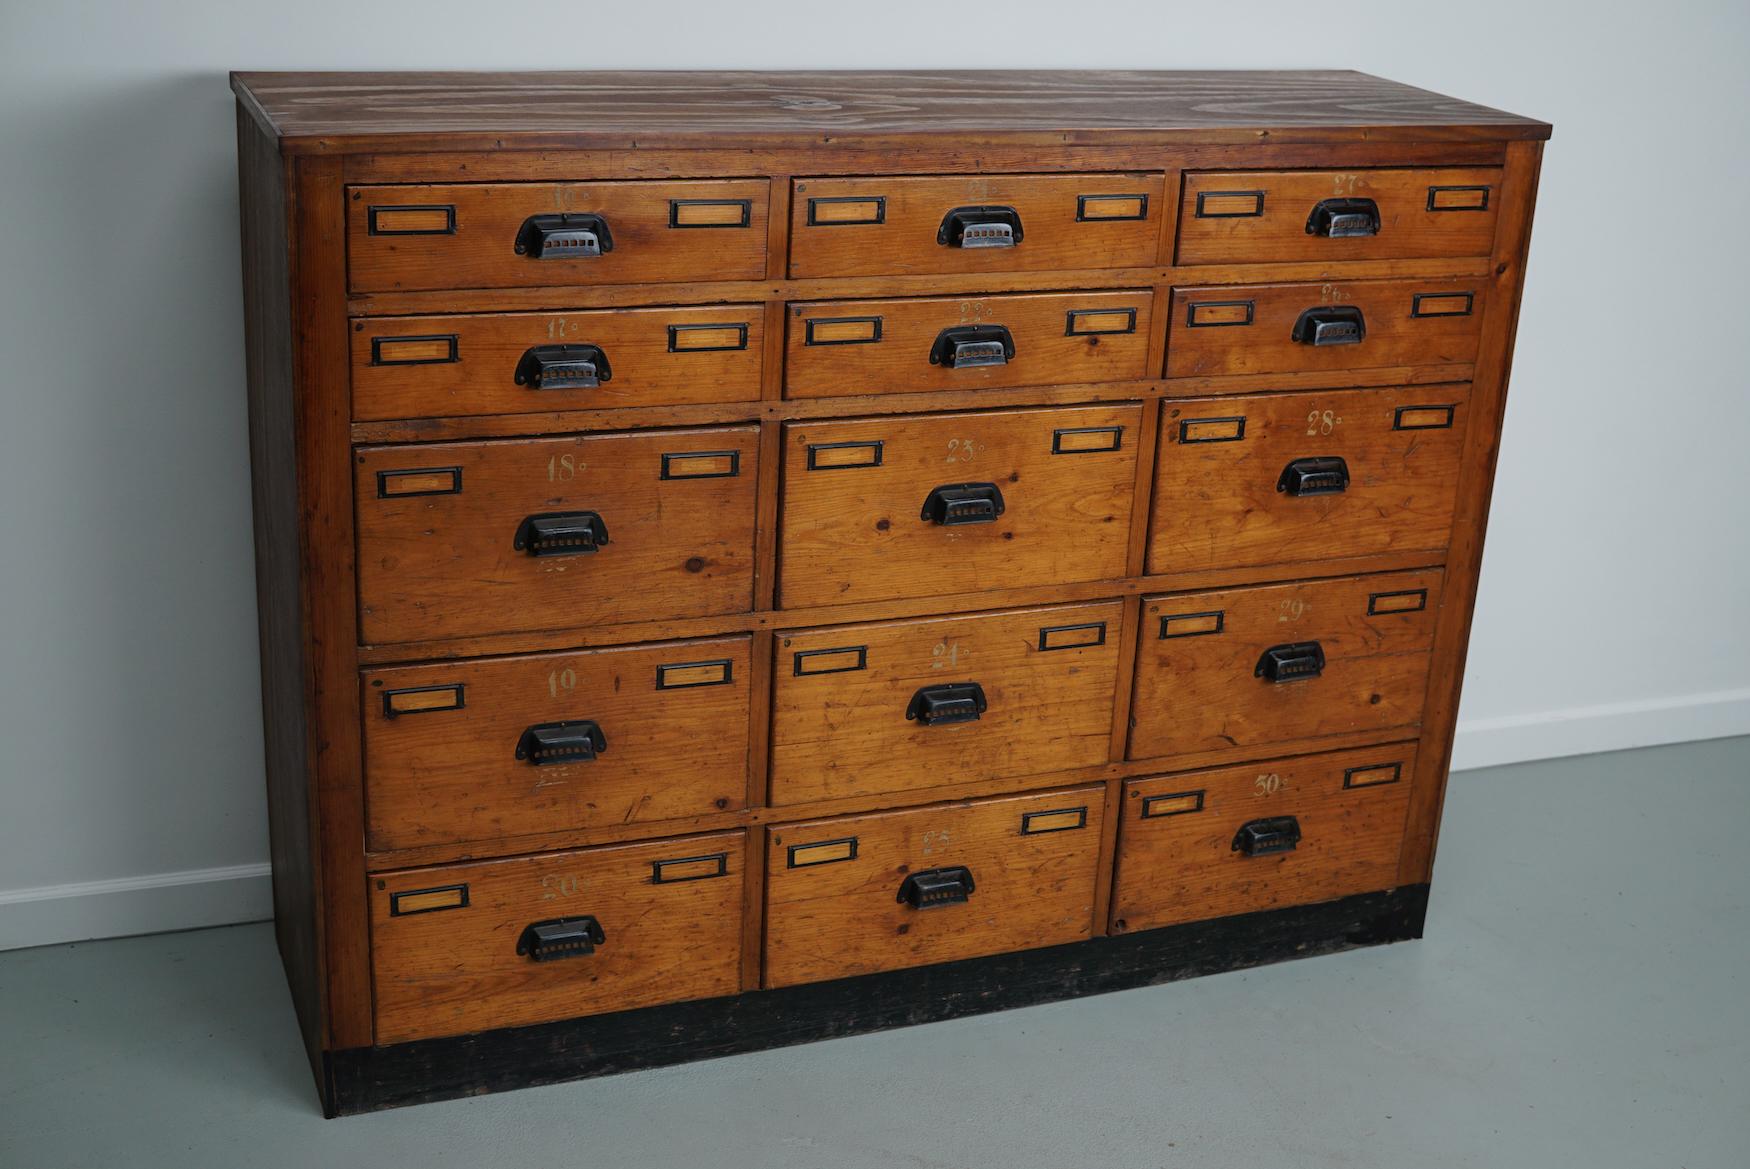 This workshop cabinet was made from pine in the Netherlands circa 1930s and it was used in a workshop for dentist equipment. It features many drawers with small knobs and name card holders. The interior dimensions of the drawers are: DWH 35 x 37 x